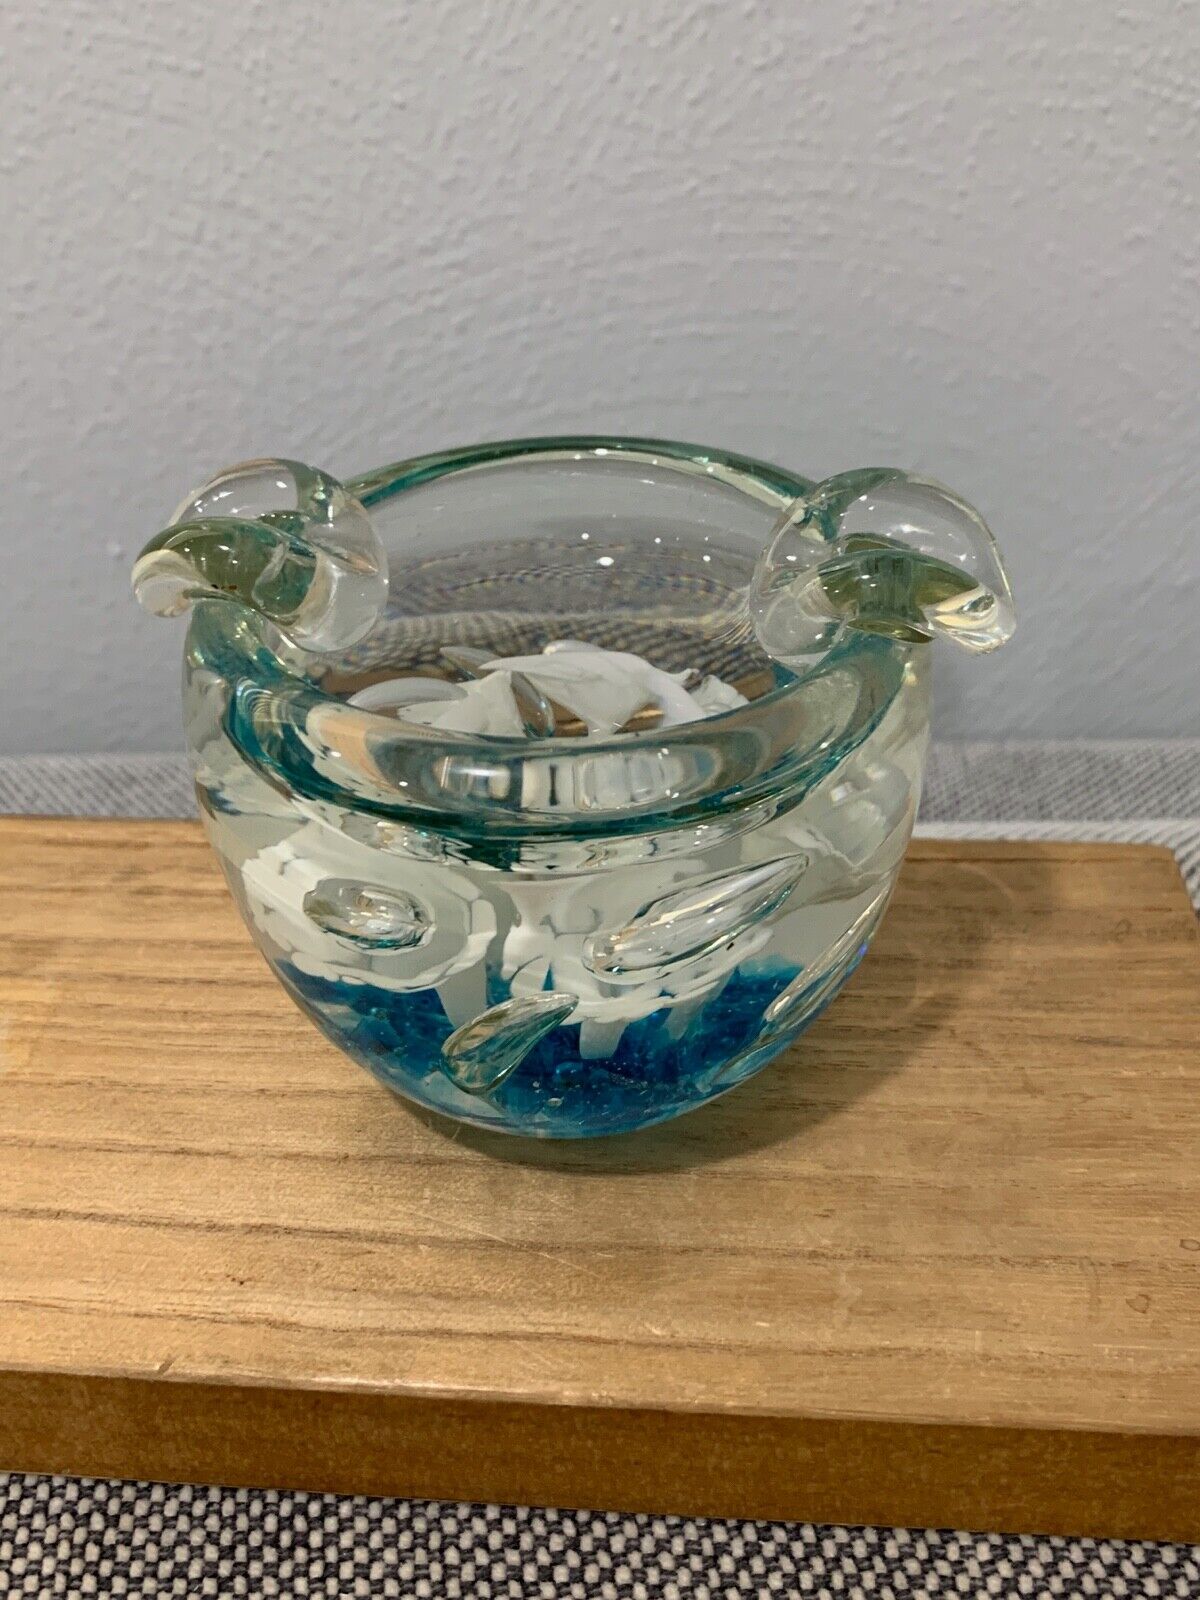 Likely Vintage Art Glass Ashtray w/ Flowers Decoration